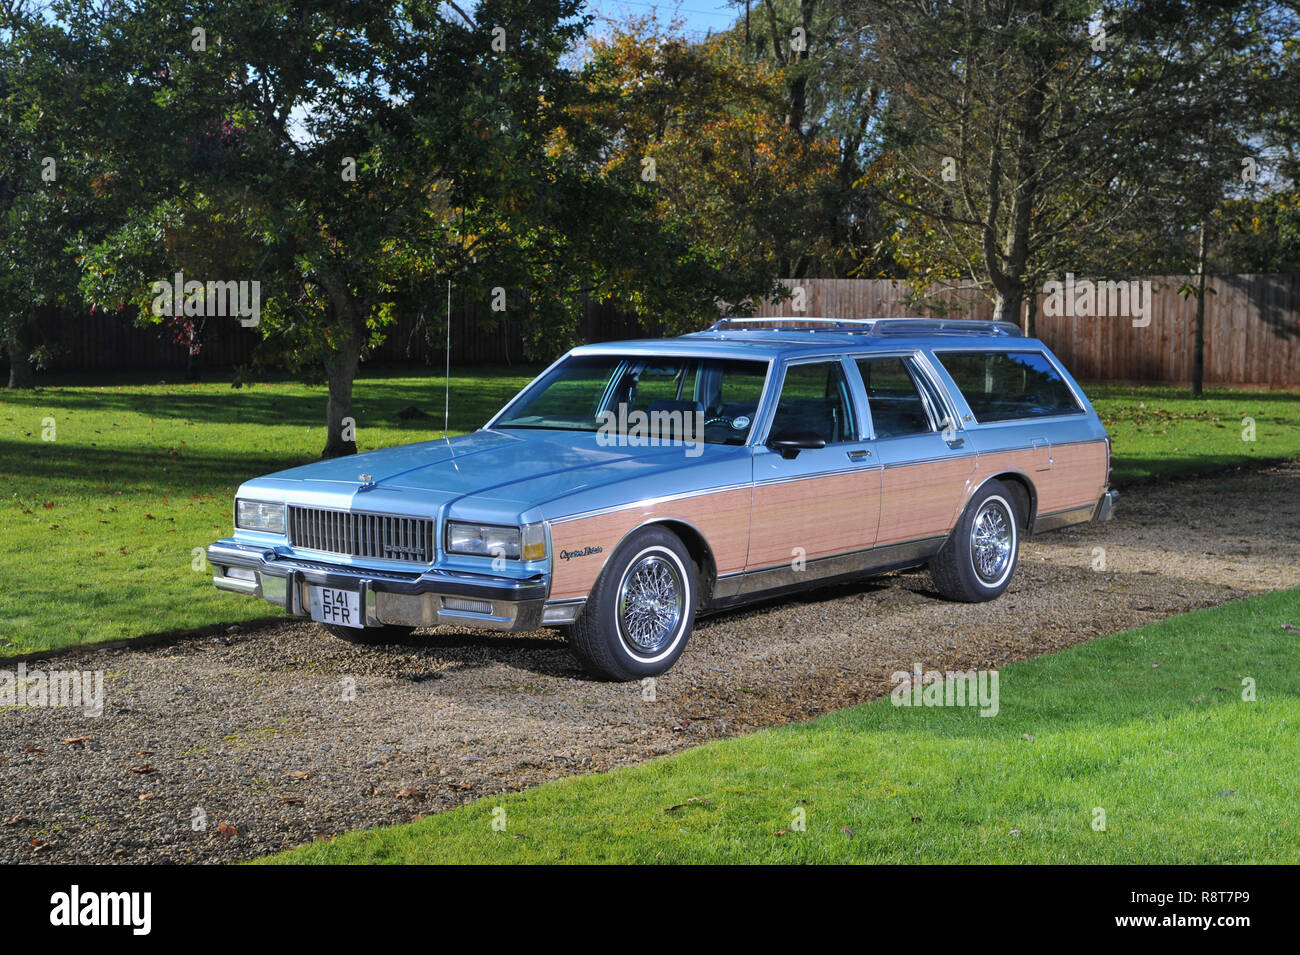 1986 Chevrolet Caprice 'Woody' station wagon, wood trimmed American family  estate car Stock Photo - Alamy